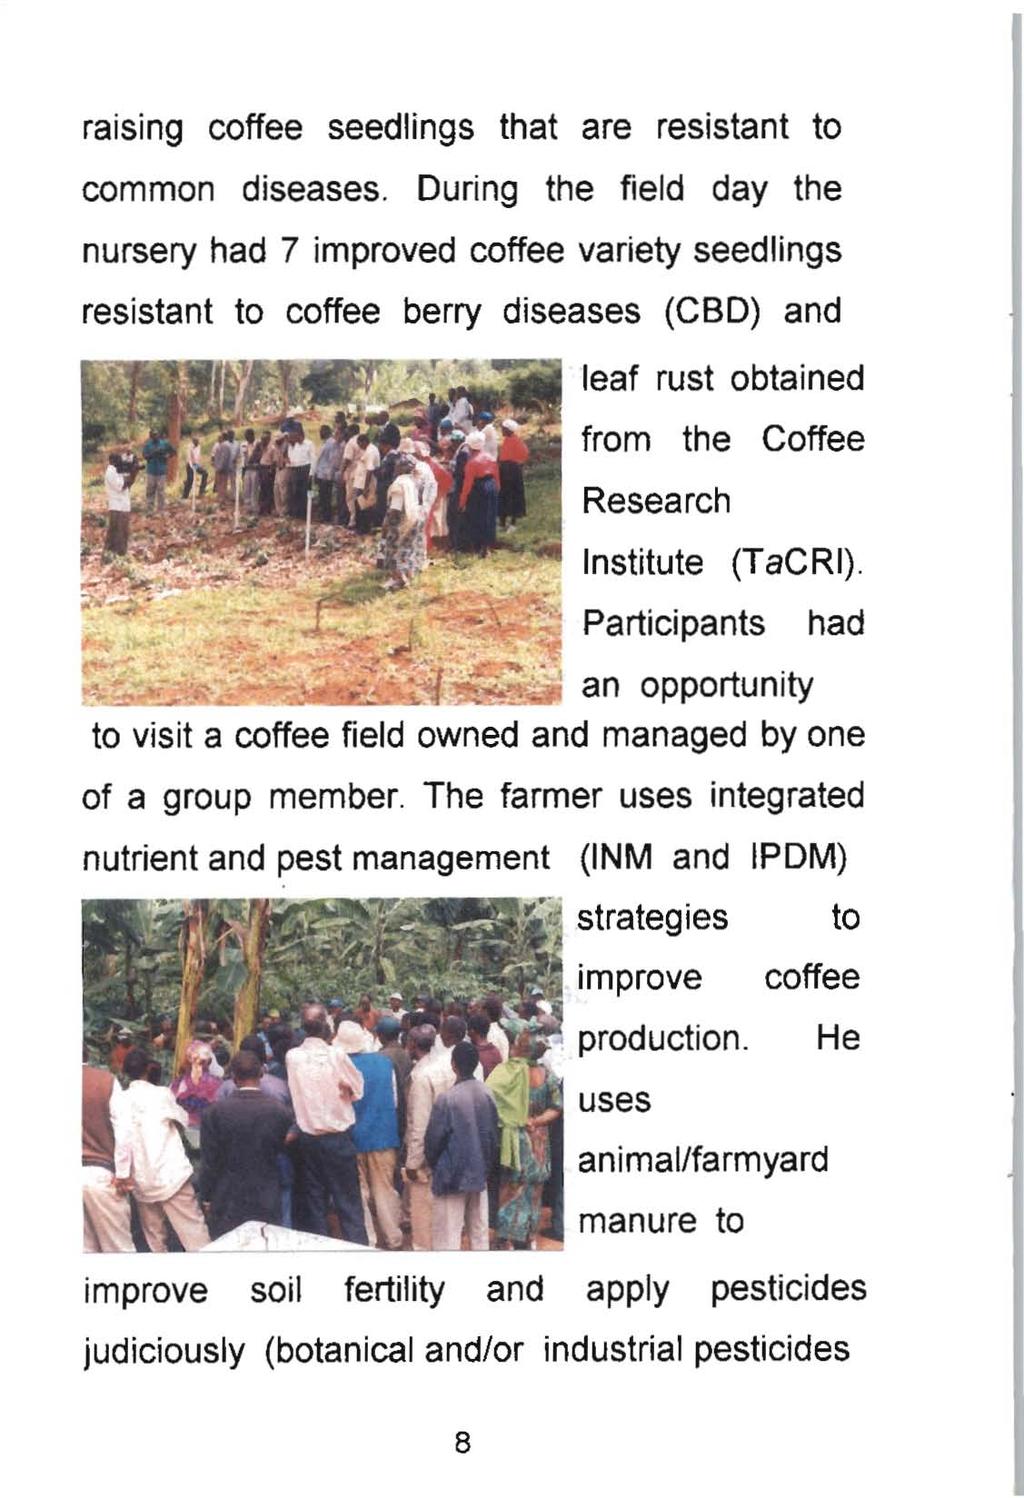 raising coffee seedlings that are resistant to common diseases.